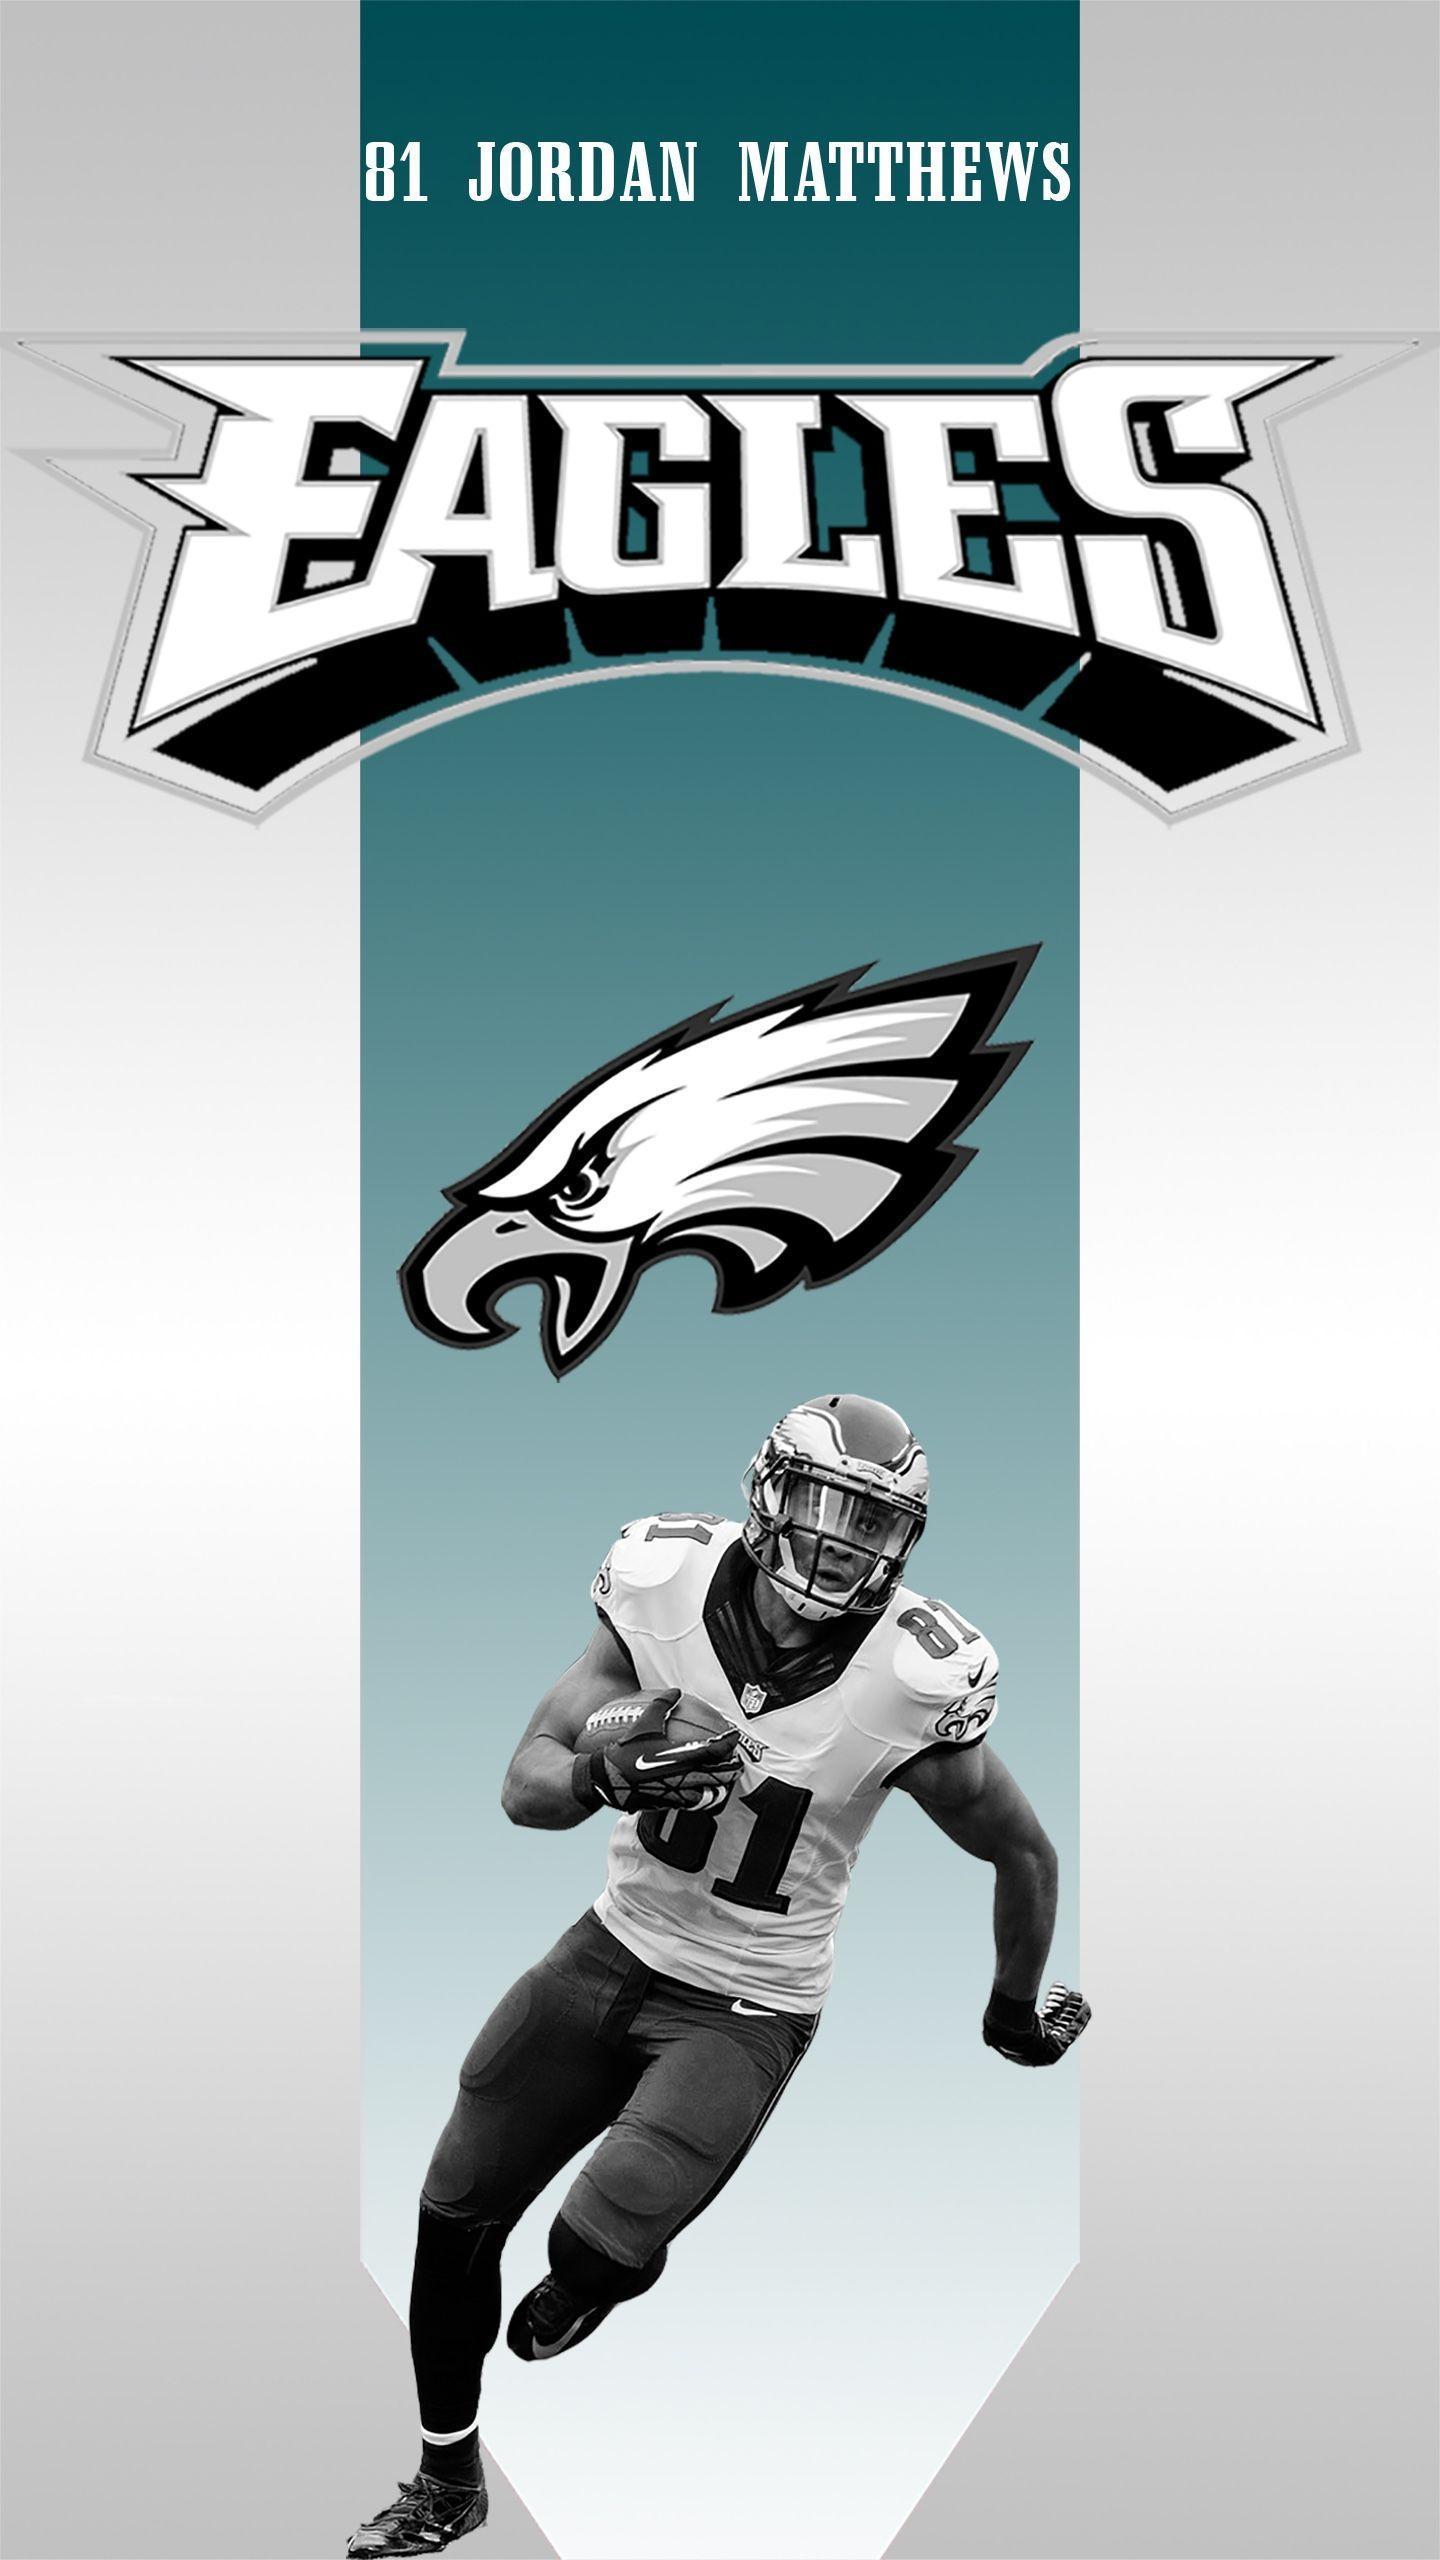 Hey Eagles fans, I made some wallpaper for every NFL team. Here